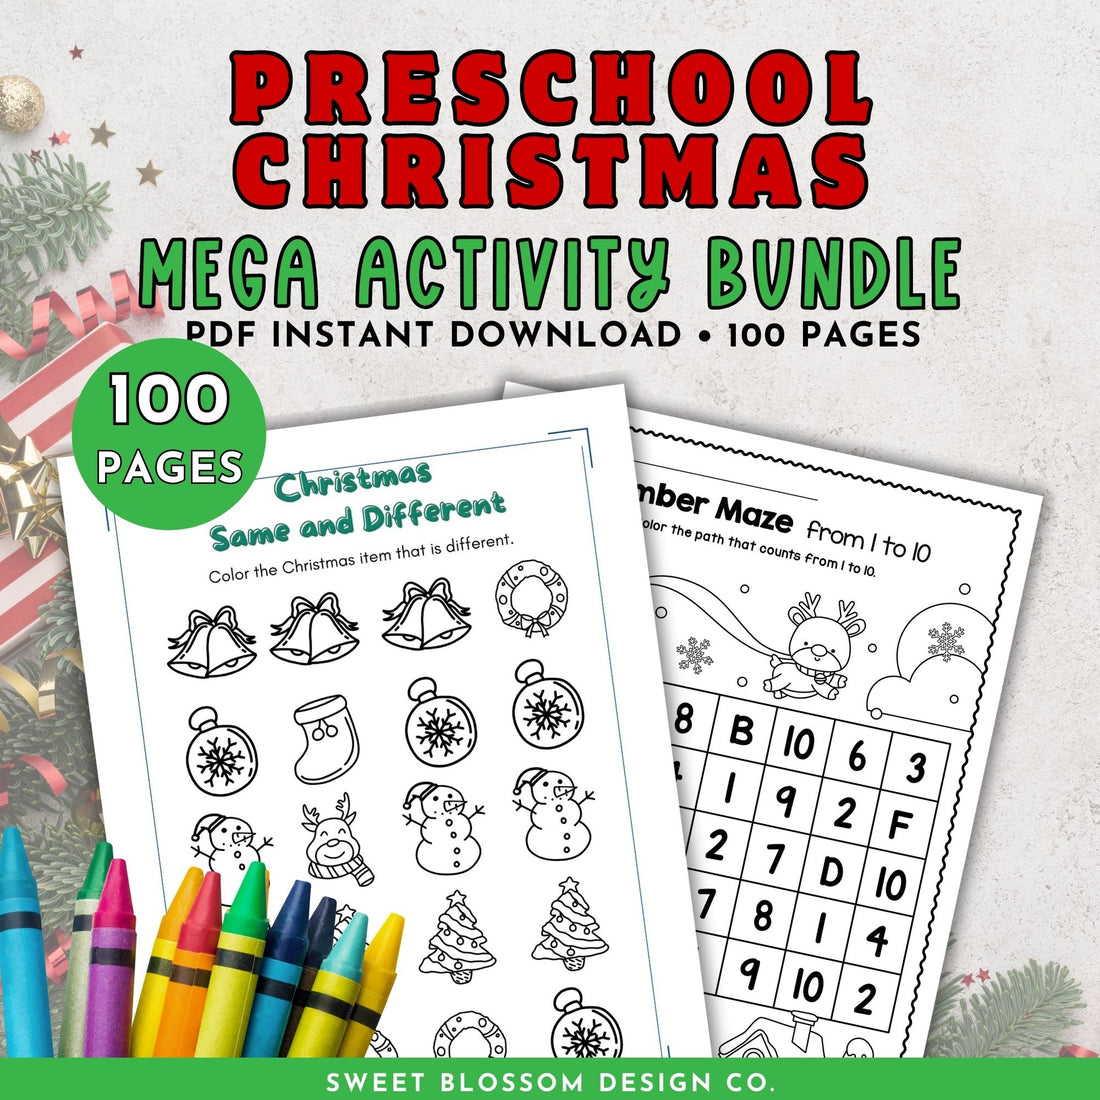 Unwrap the magic of learning with our Christmas Preschool Activity Bundle, a 100-page PDF filled to the brim with joyful and educational activities designed specifically for preschoolers.